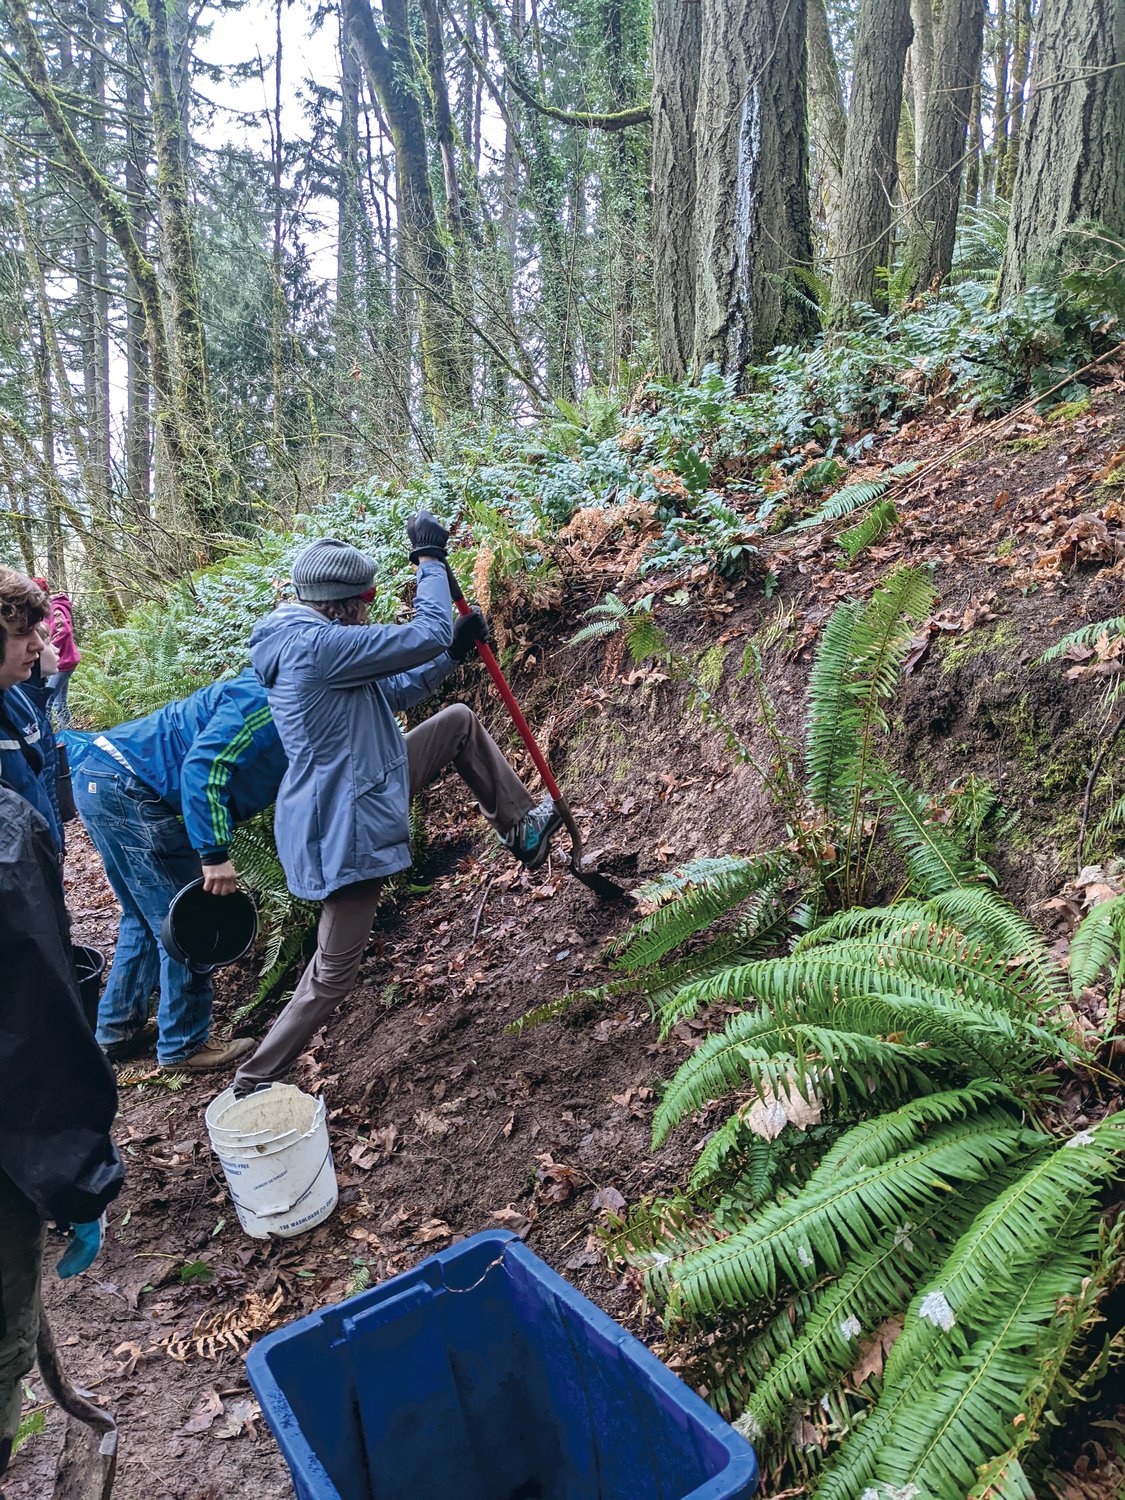 Members of the Boy Scout Troop No. 373, based in Chehalis, help transplant sword ferns and other native plants at the Seminary Hill Natural Area on Jan. 22.